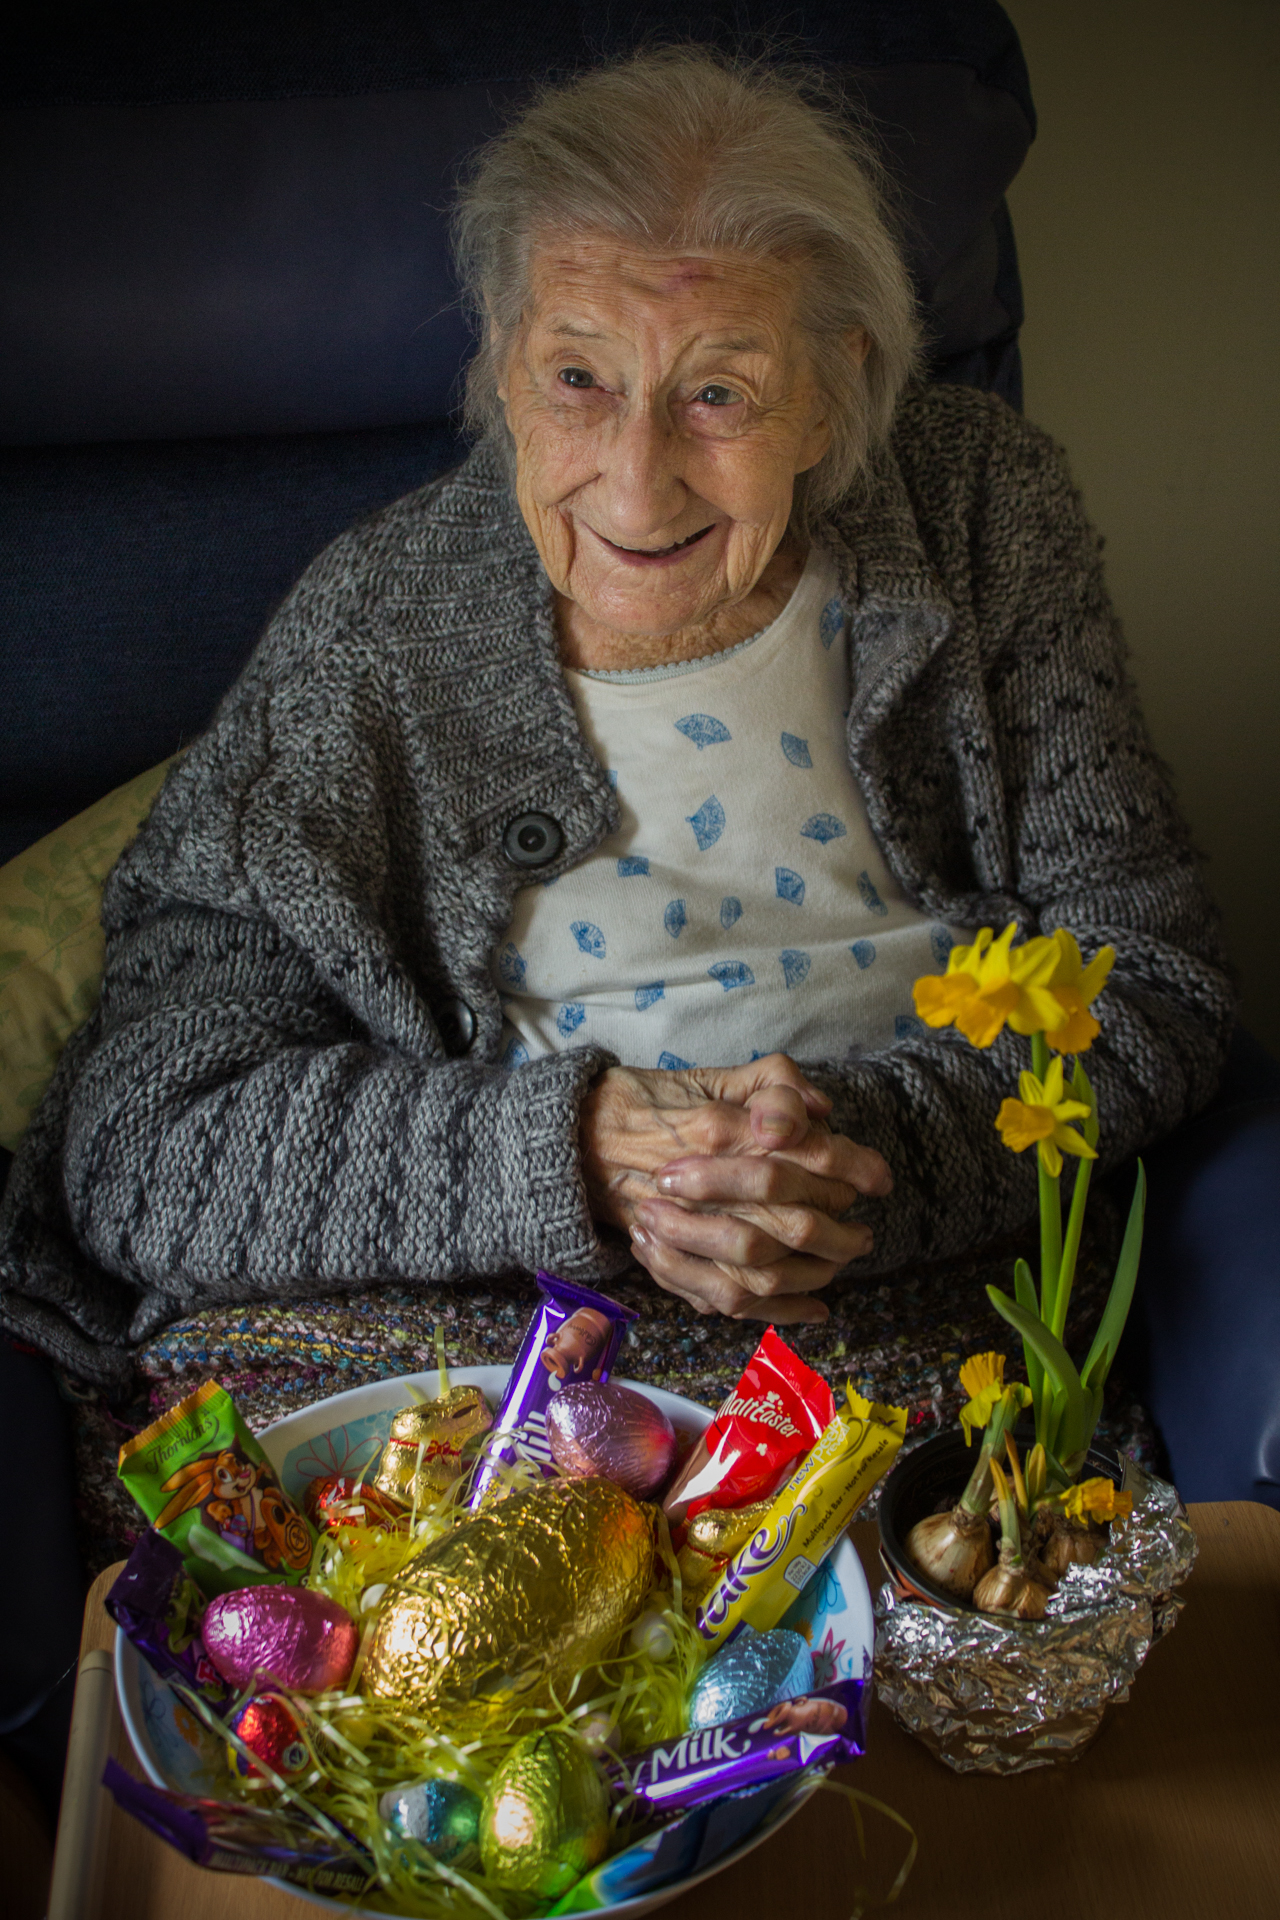 Dorothy seemed thrilled with the chocolate goodies we brought her.